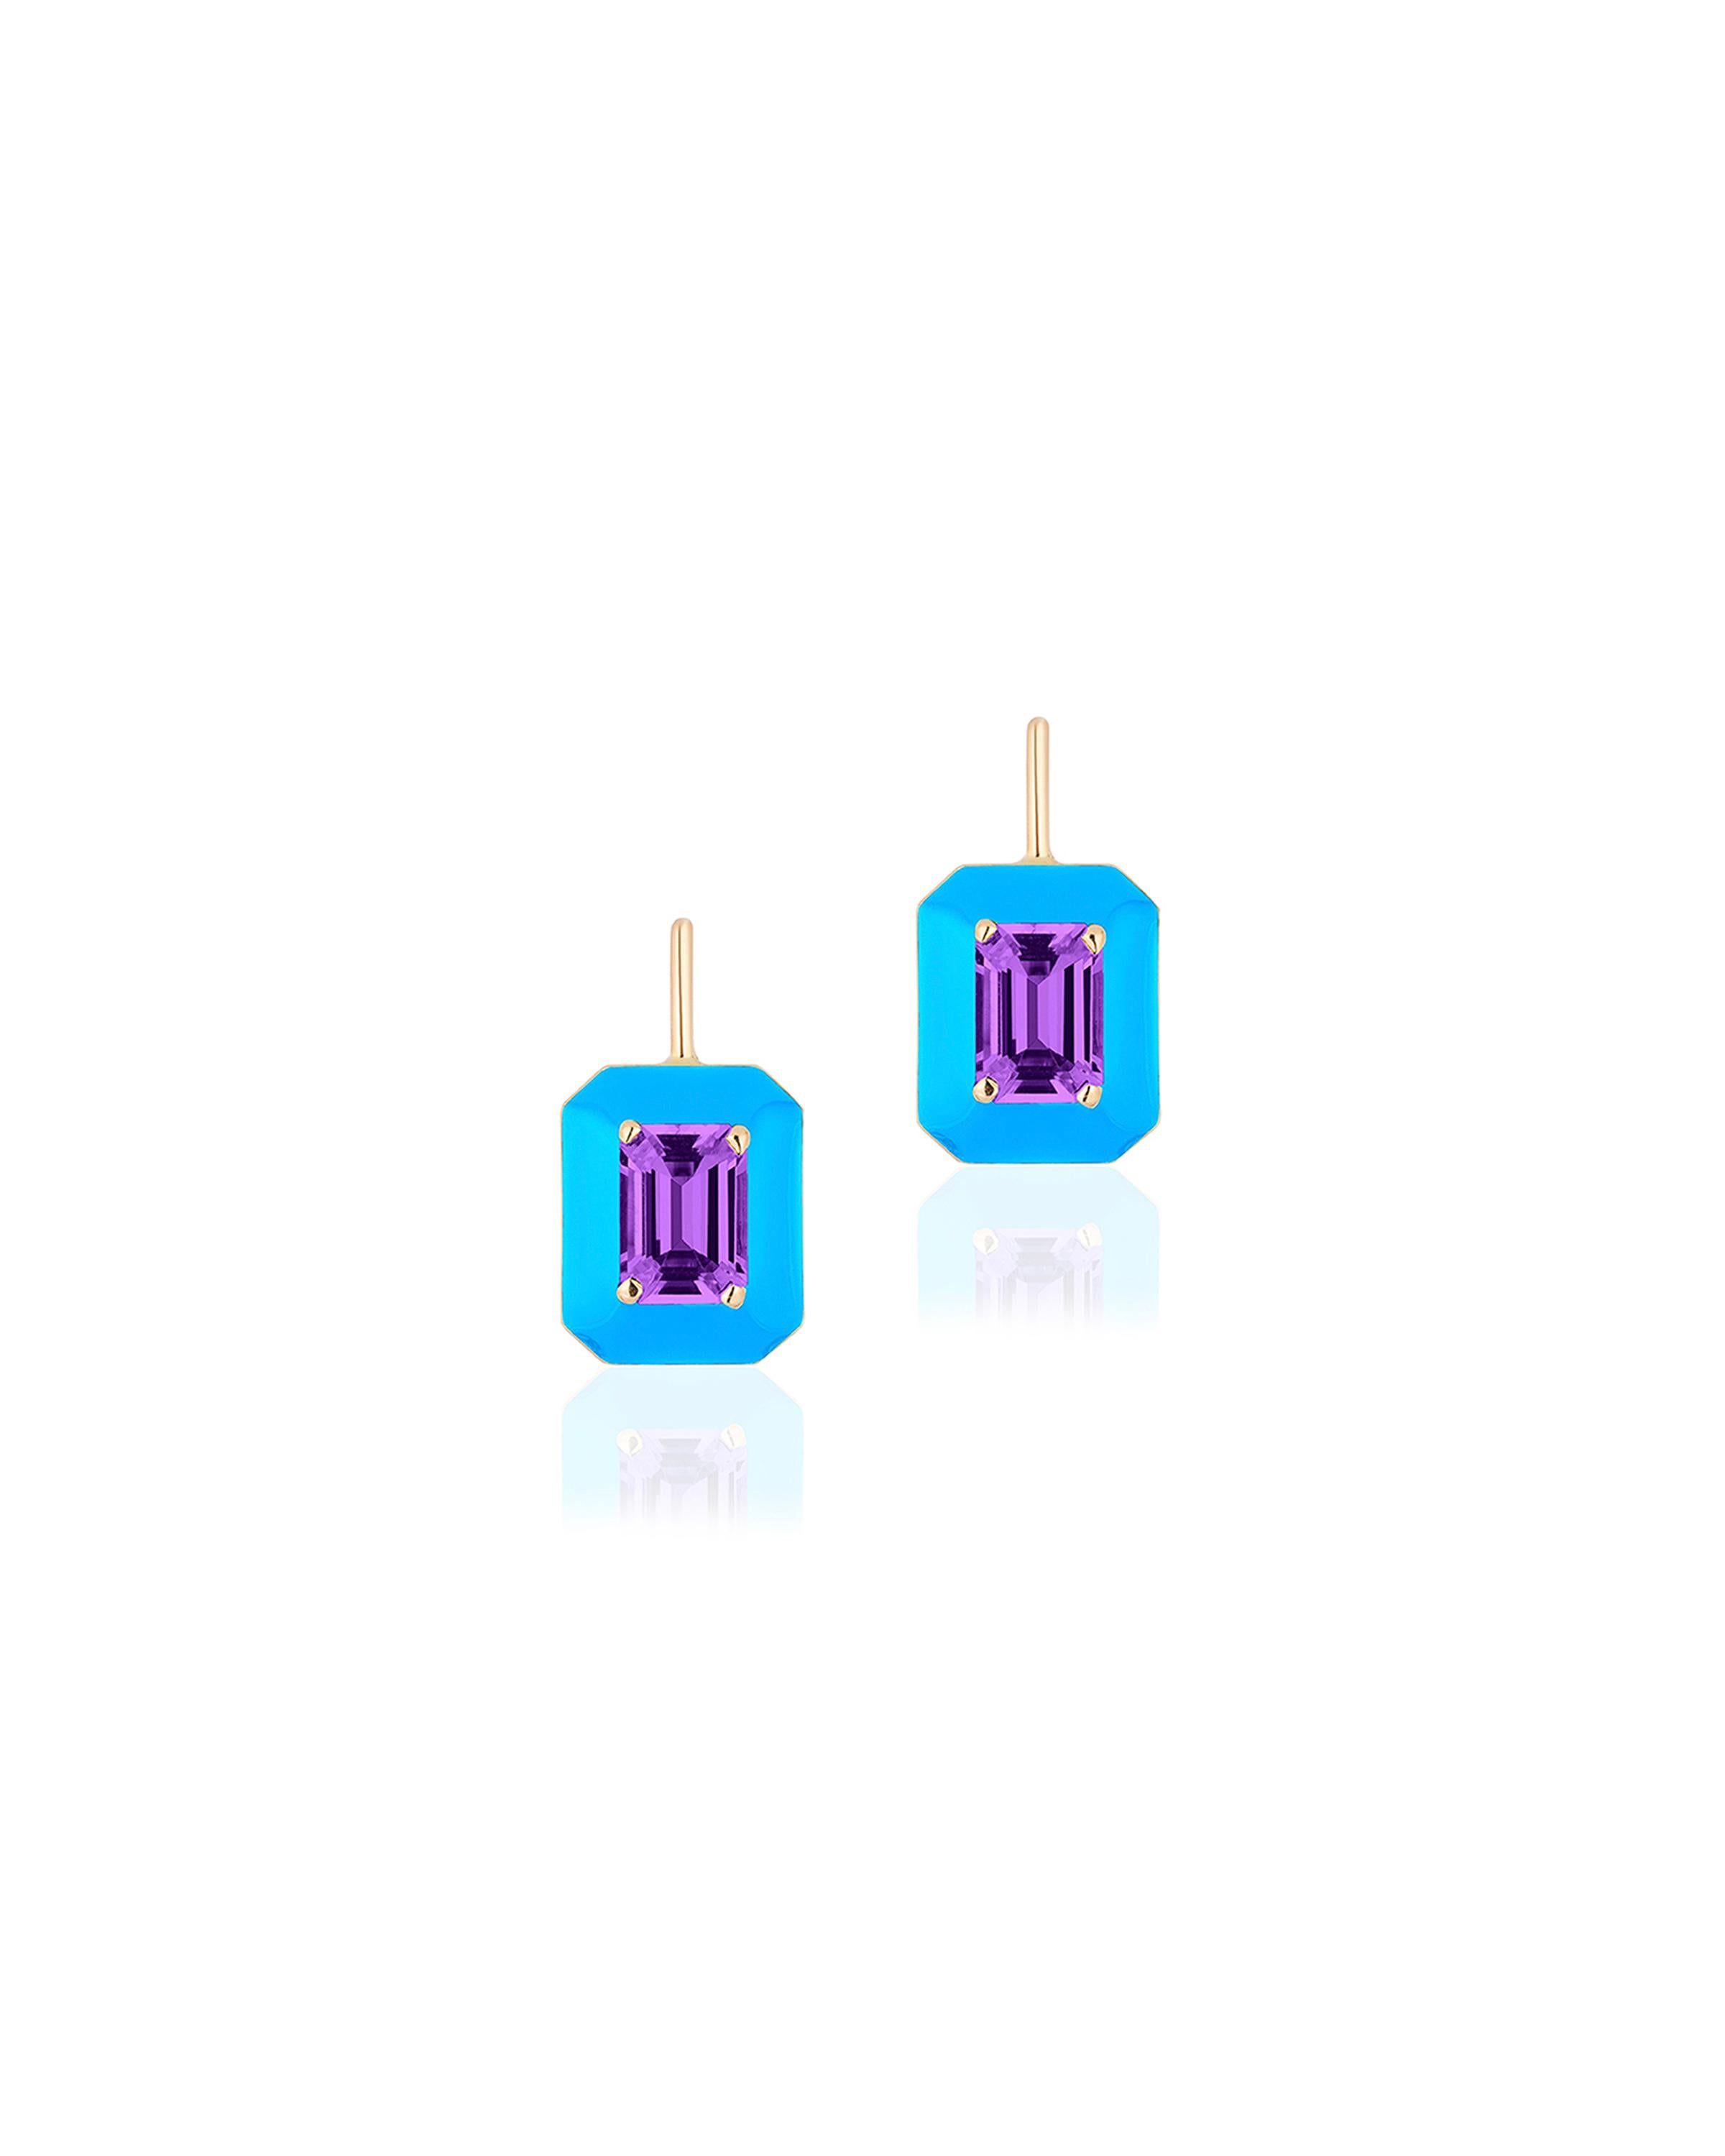 These unique earrings are an Amethyst Emerald Cut, with Turquoise Enamel border and Lever back. From our ‘Queen’ Collection, it was inspired by royalty, but with a modern twist. The combination of enamel, and Amethyst represents power, richness and